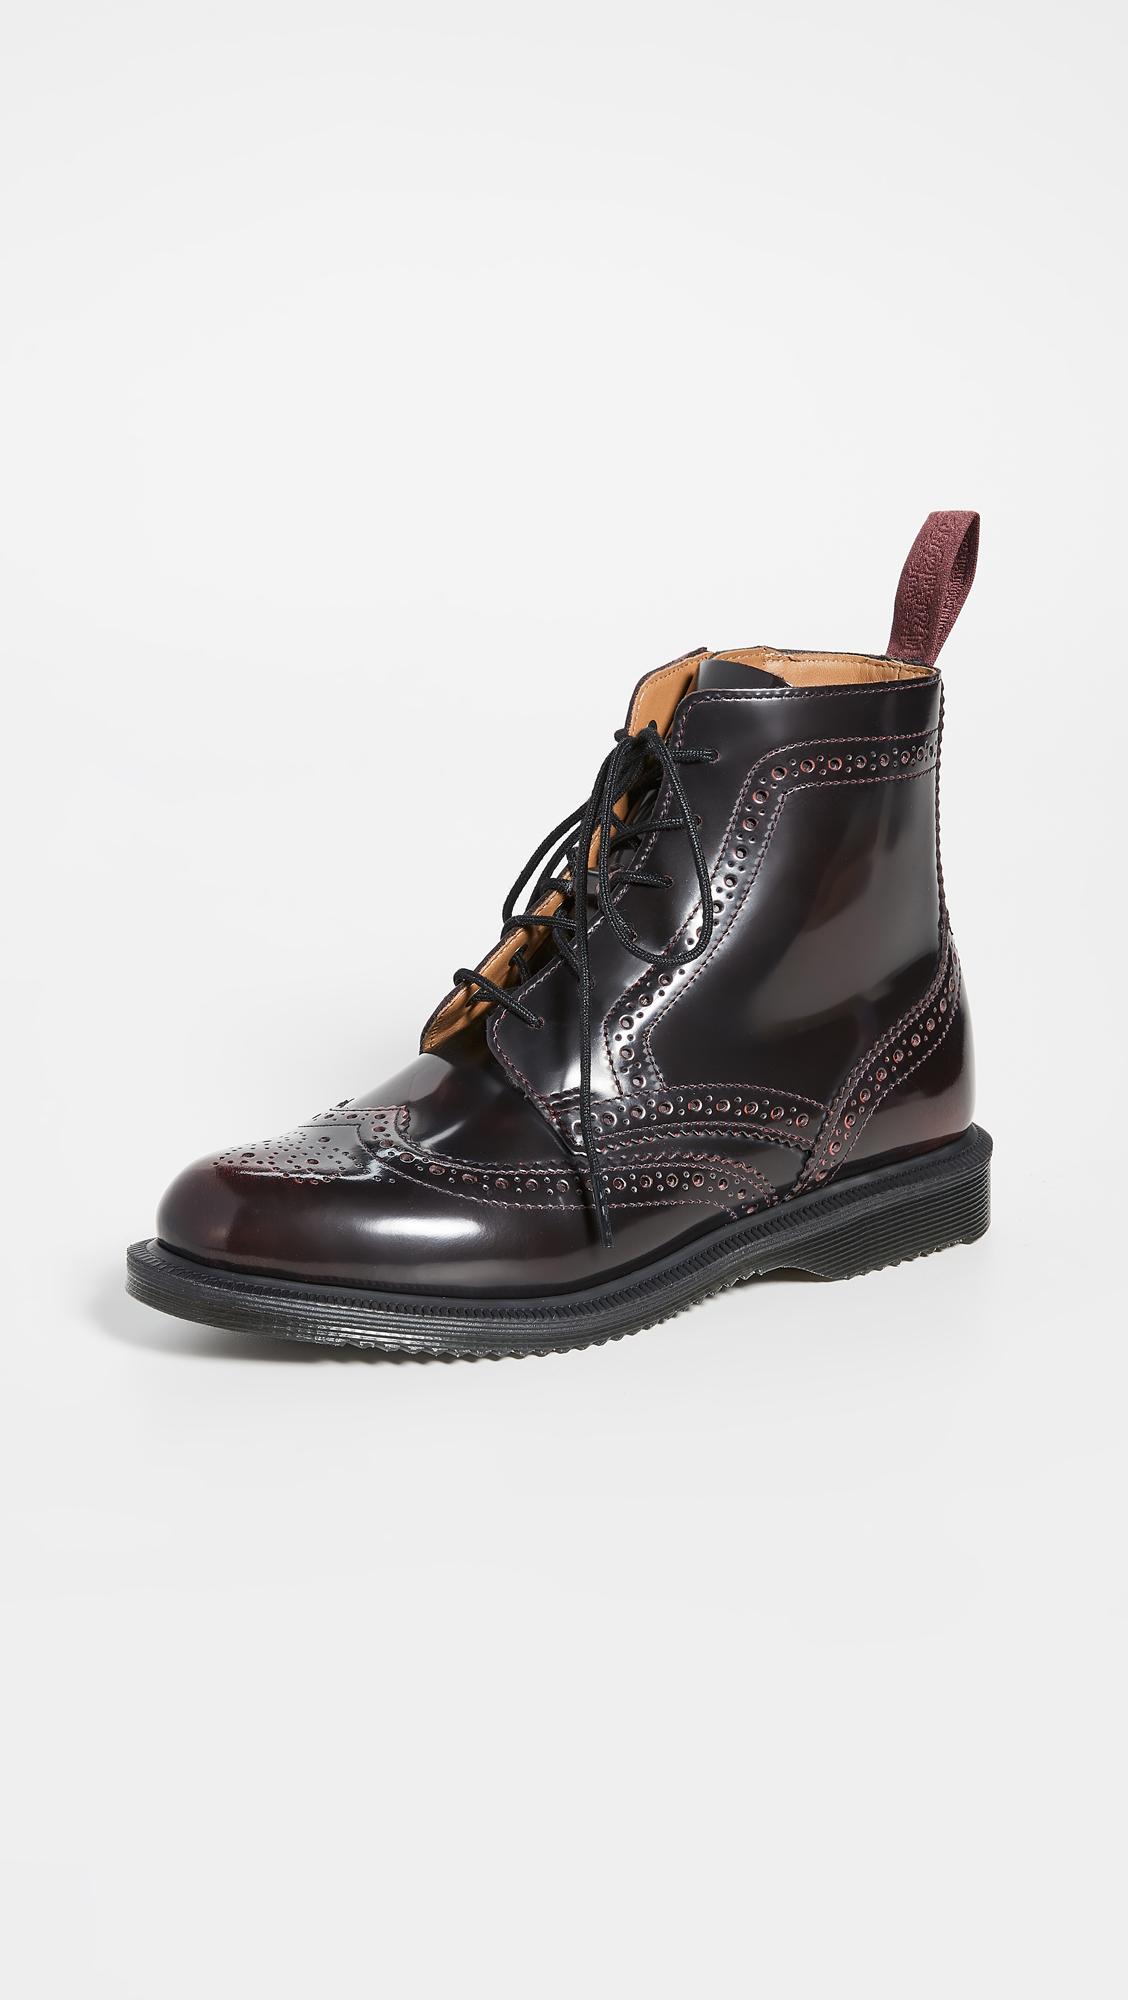 Dr. Martens Delphine 6 Eye Brogue Boots in Black | Lyst